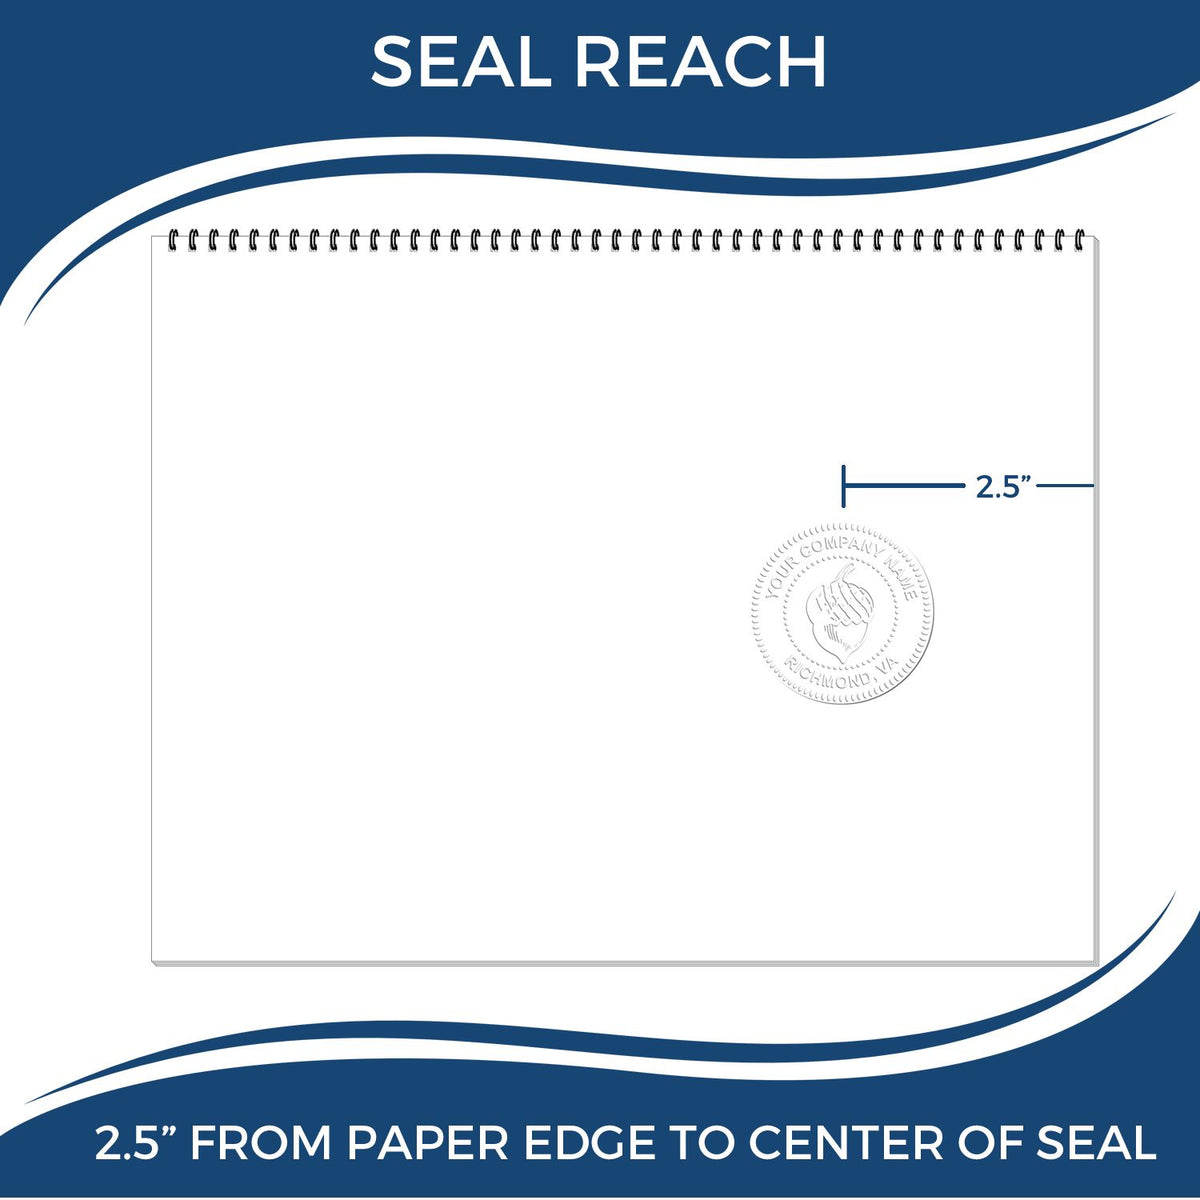 An infographic showing the seal reach which is represented by a ruler and a miniature seal image of the Long Reach Guam PE Seal